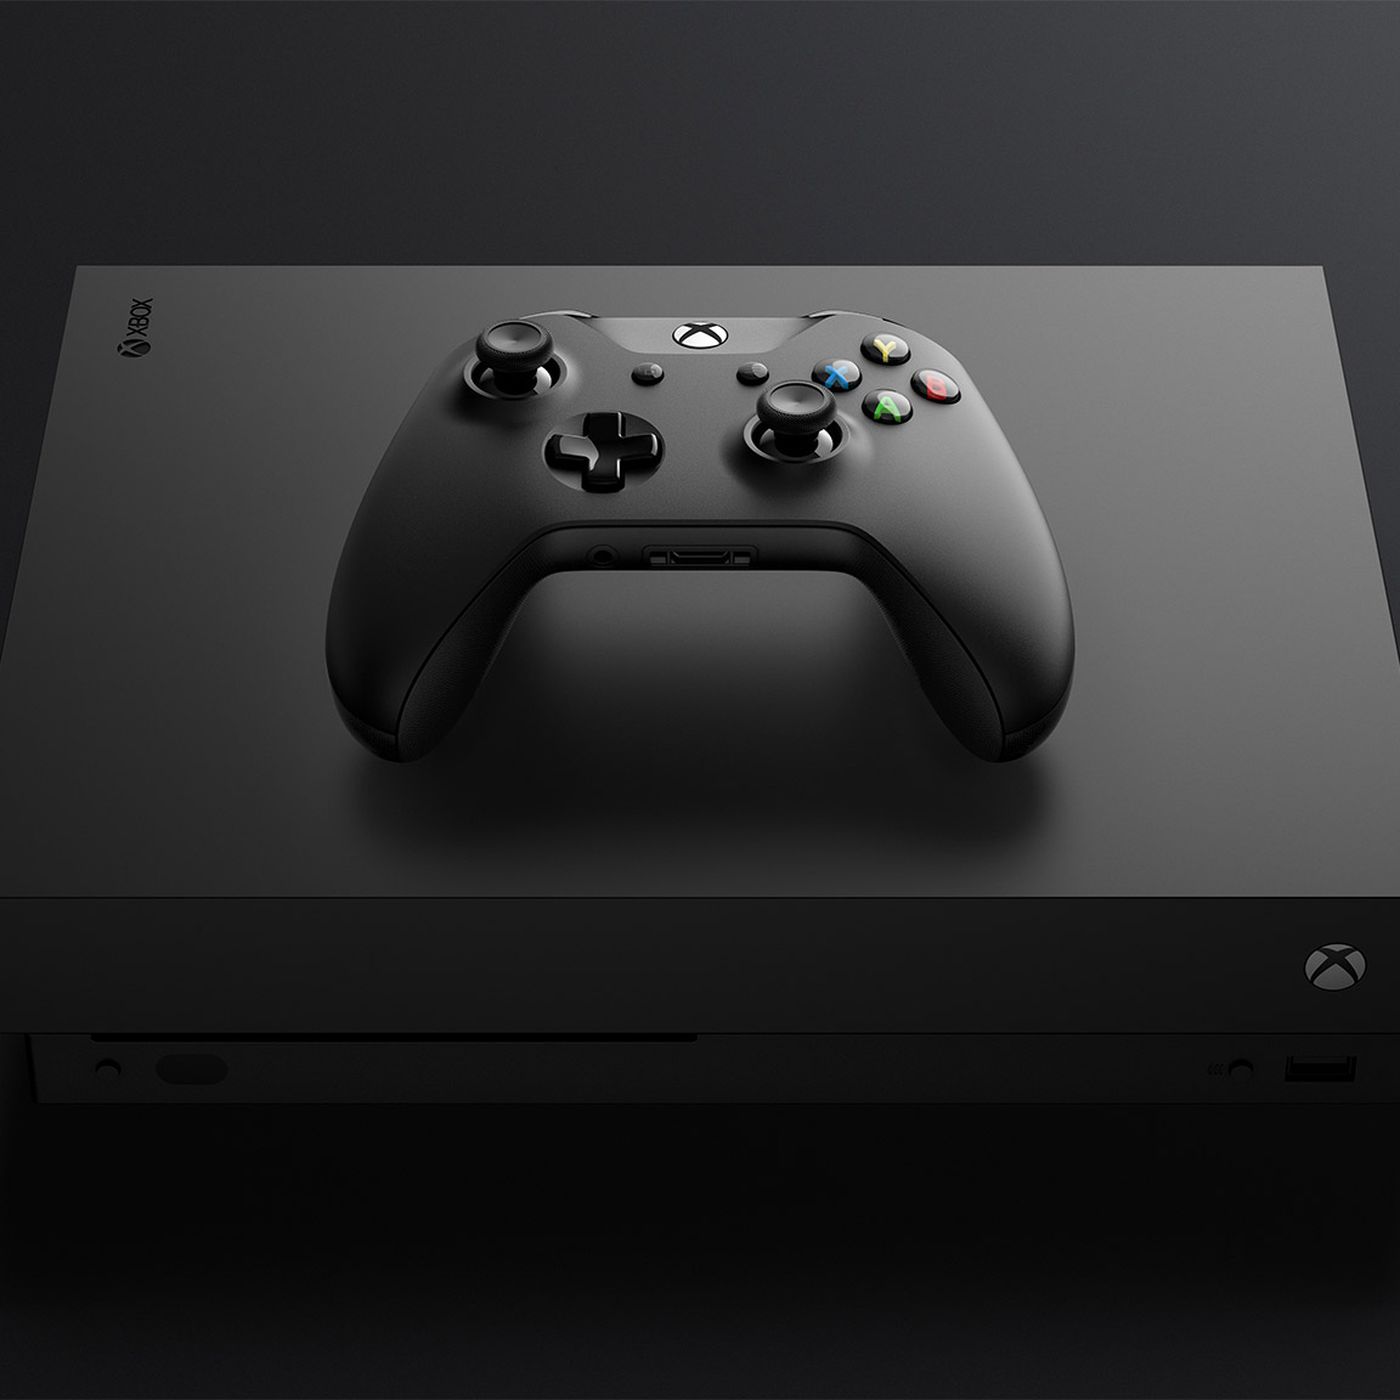 The Xbox One X makes the PlayStation 4 Pro feel half-measure -